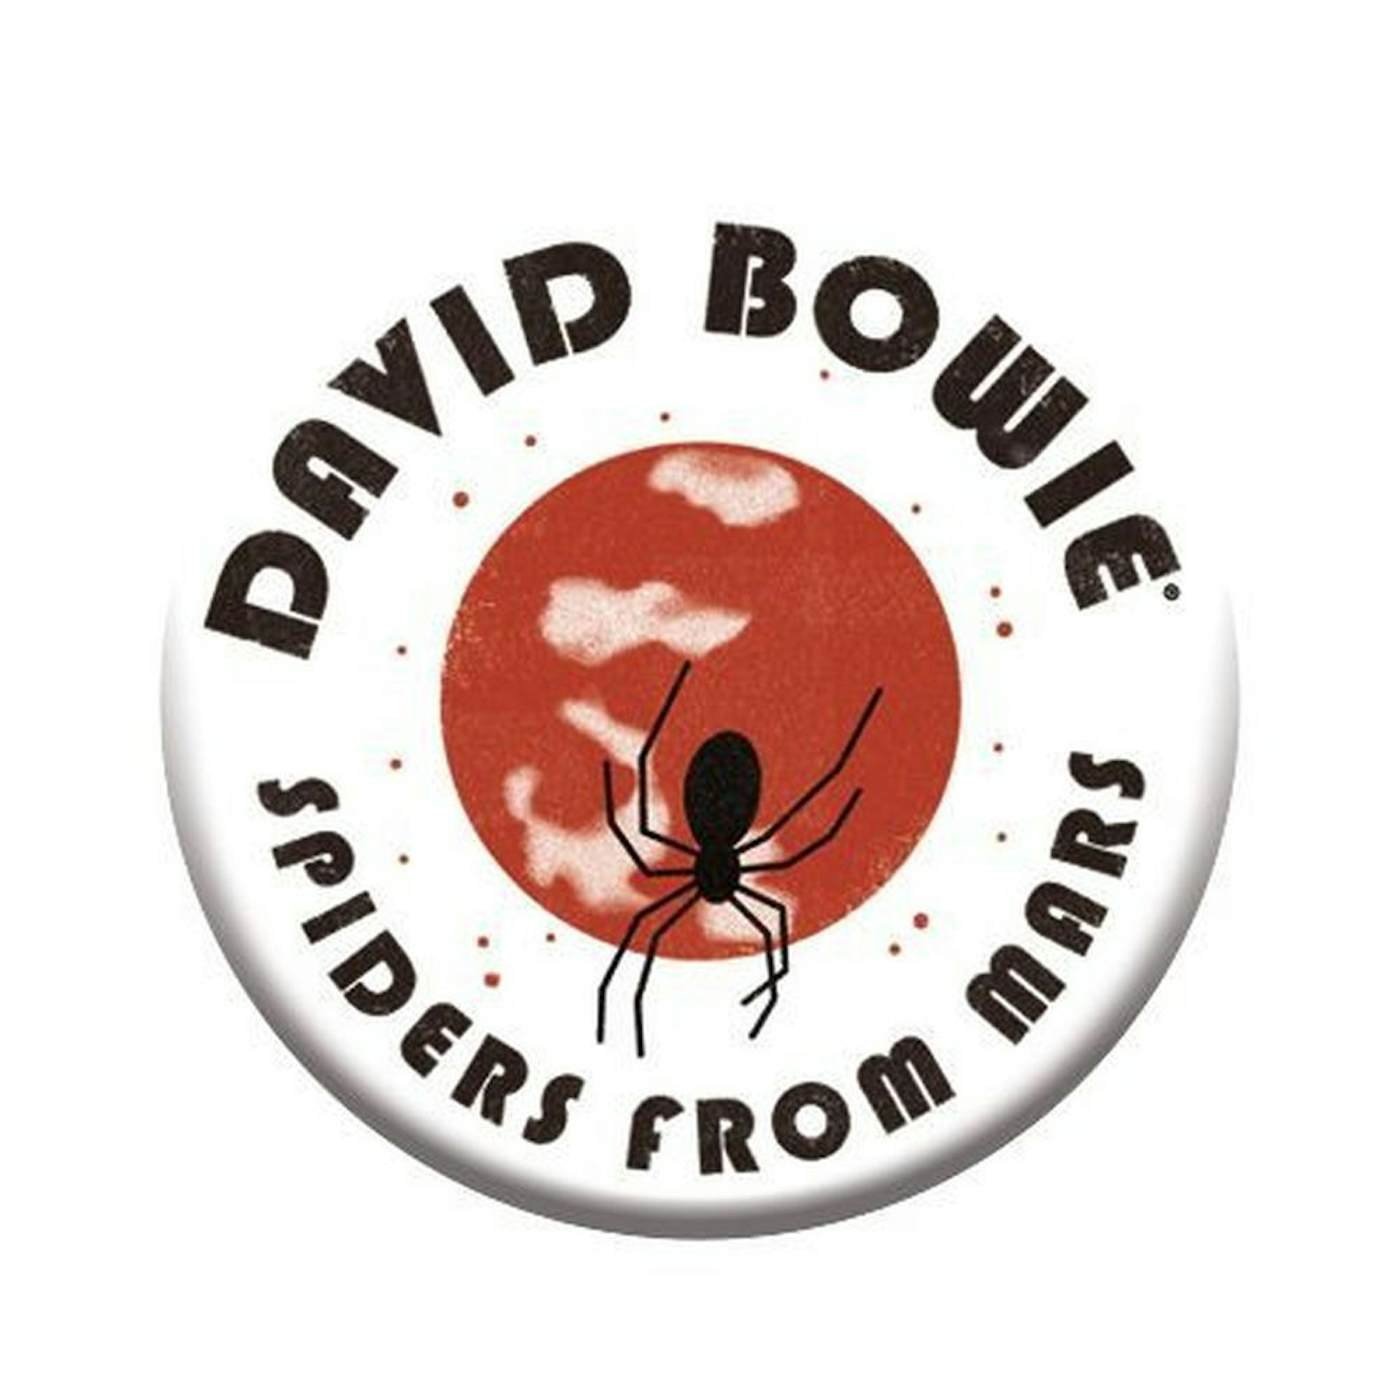 David Bowie Ziggy Stardust & the Spiders from Mars Enamel Pin